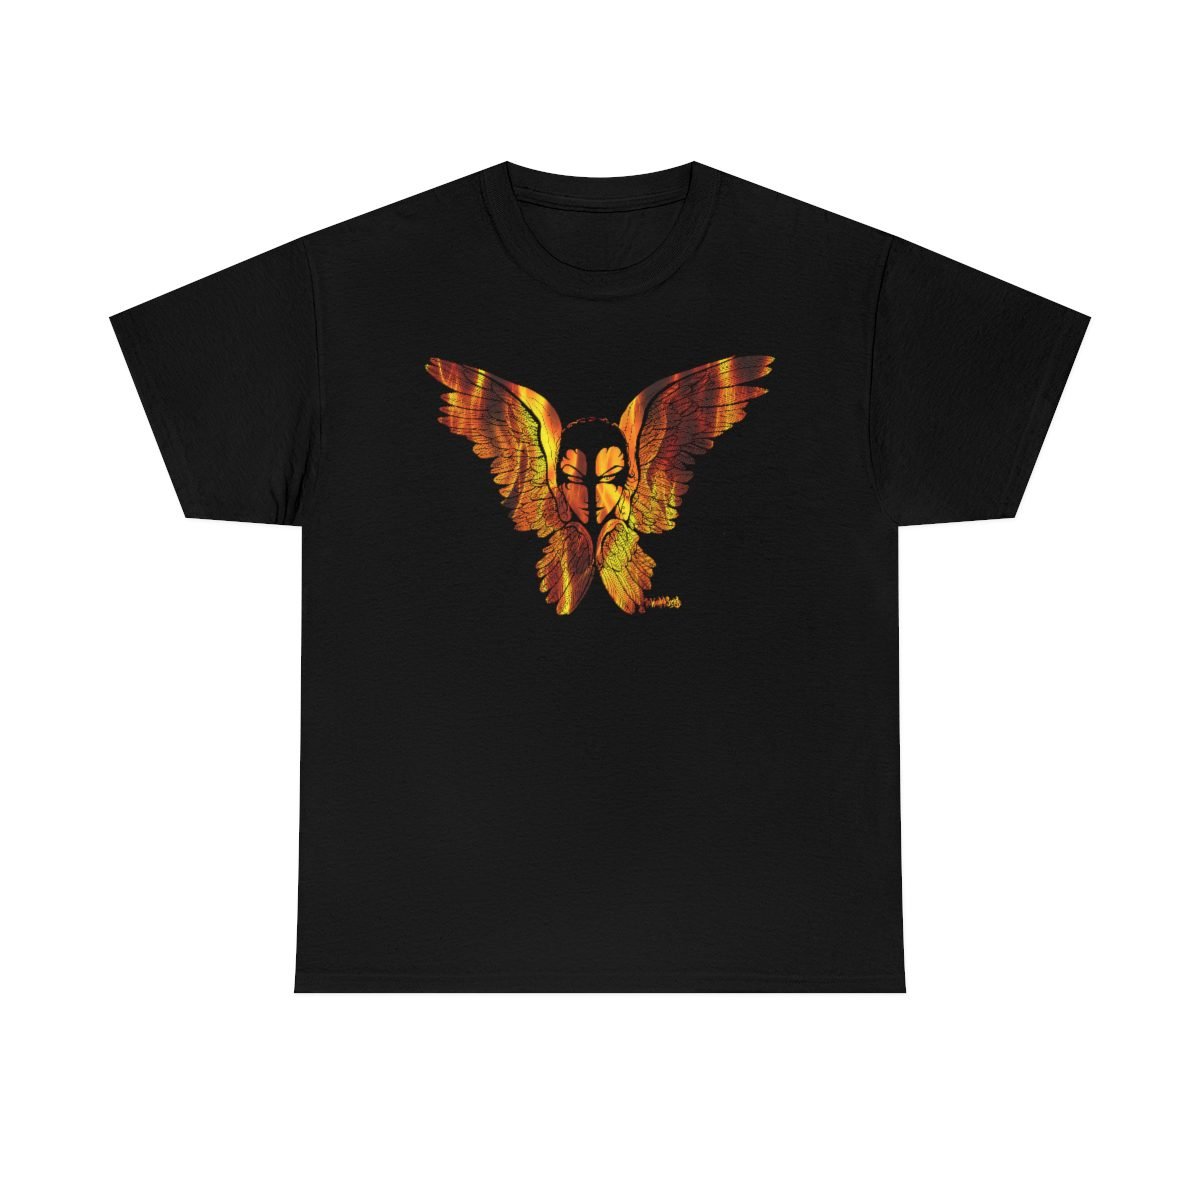 The Seraphim Flames Version by The Wounded Society Short Sleeve Tshirt